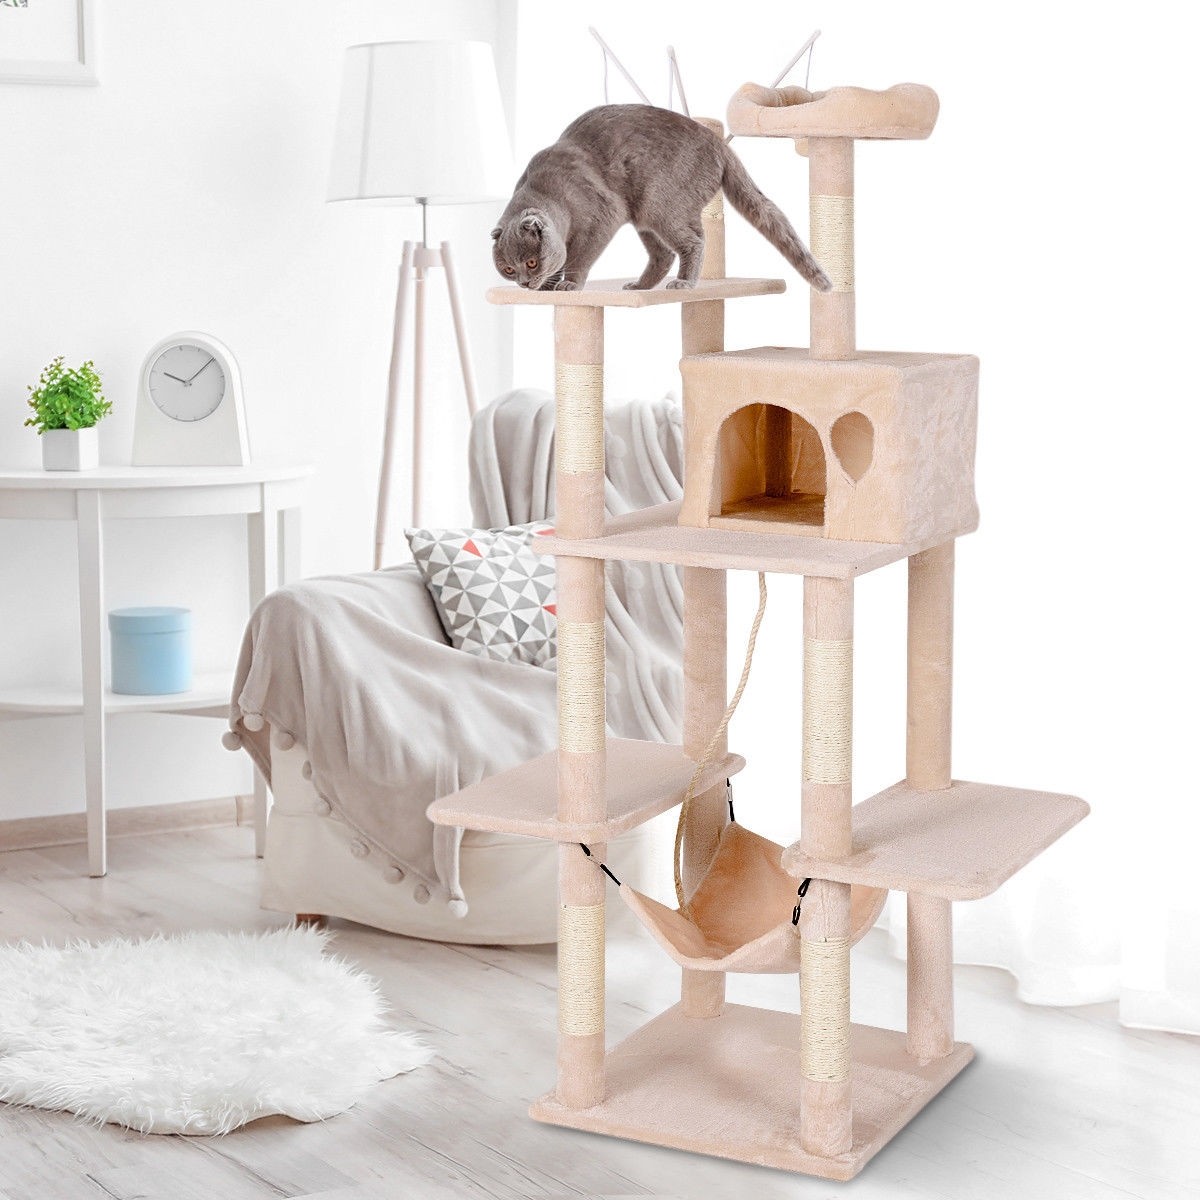 Multilevel Activity Tower Condo with Hammock Scratching Post